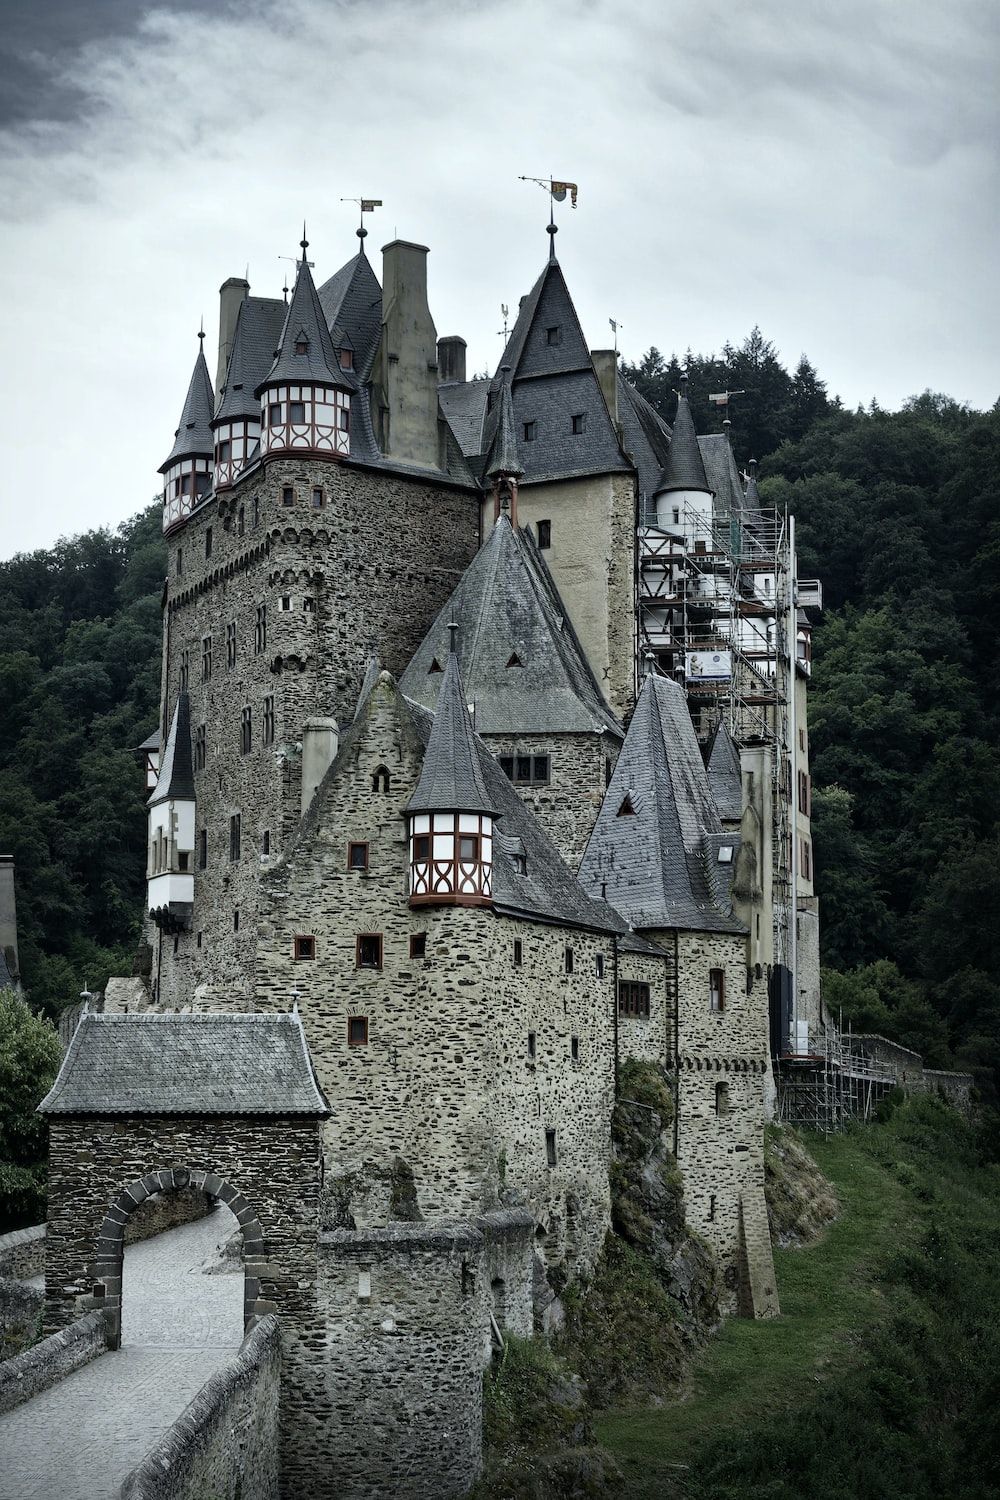 A castle on a hillside with turrets and a bridge leading to it. - Castle